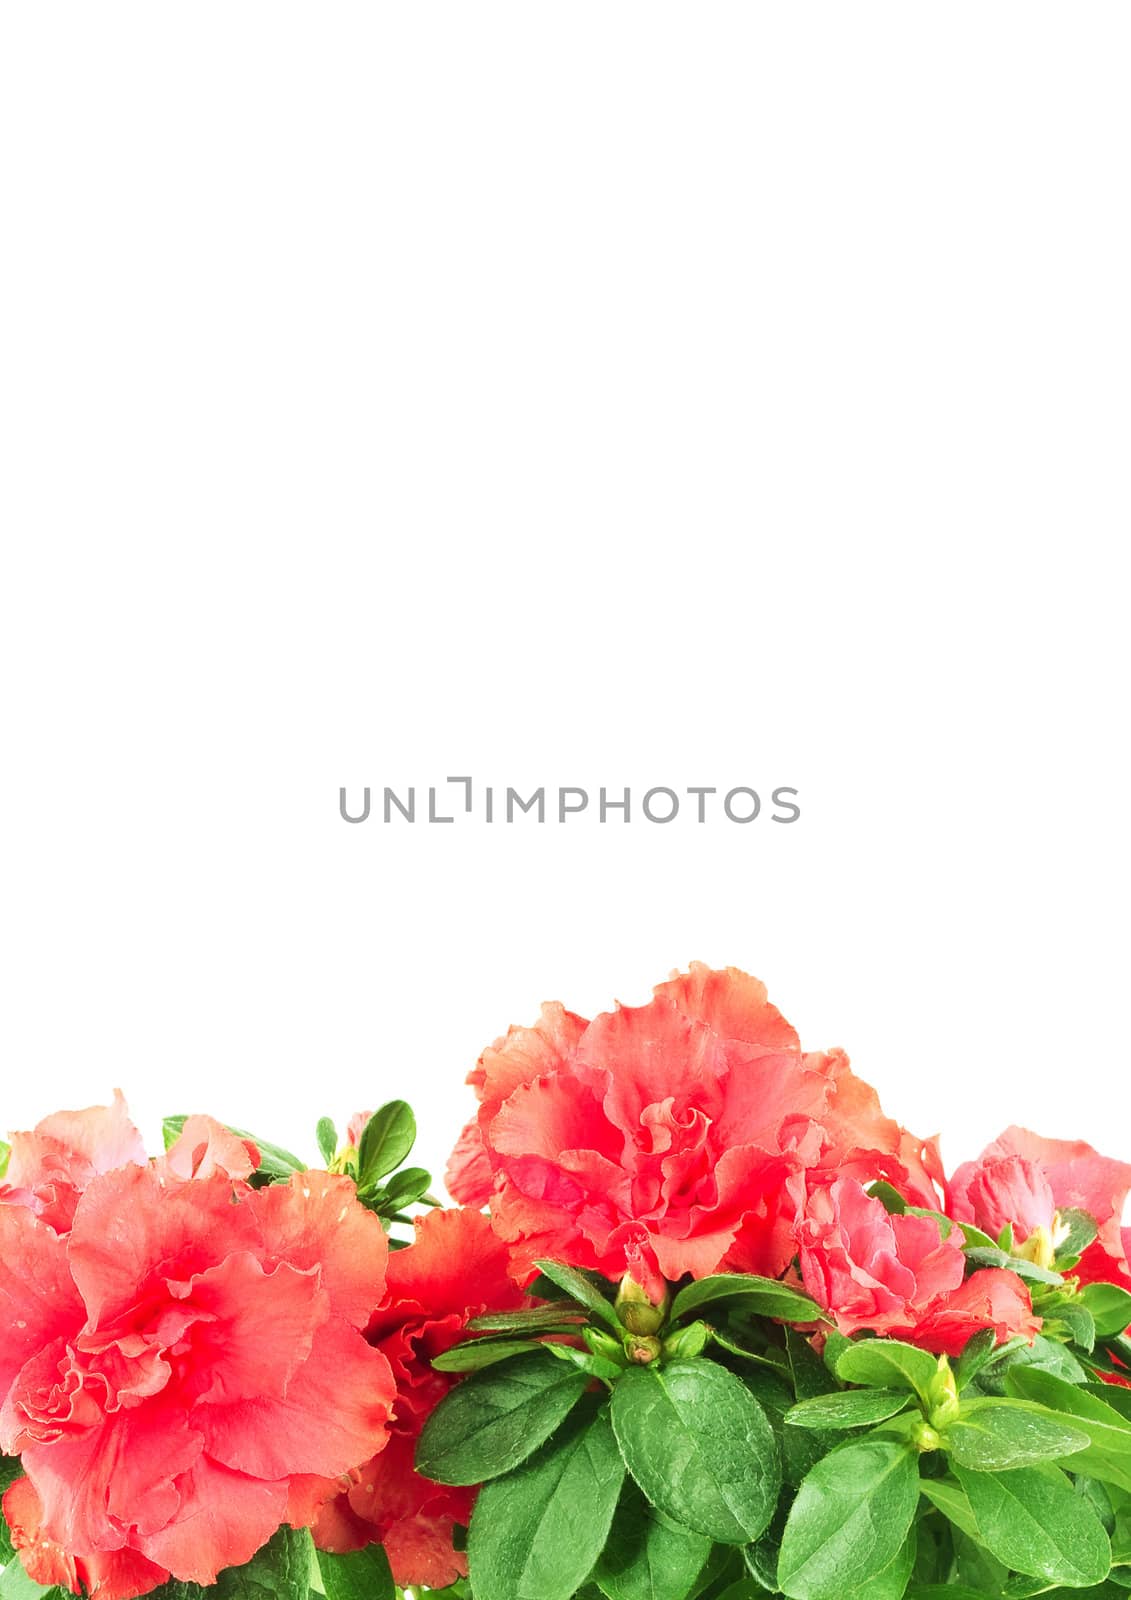 Flowers with leaves isolated on white background